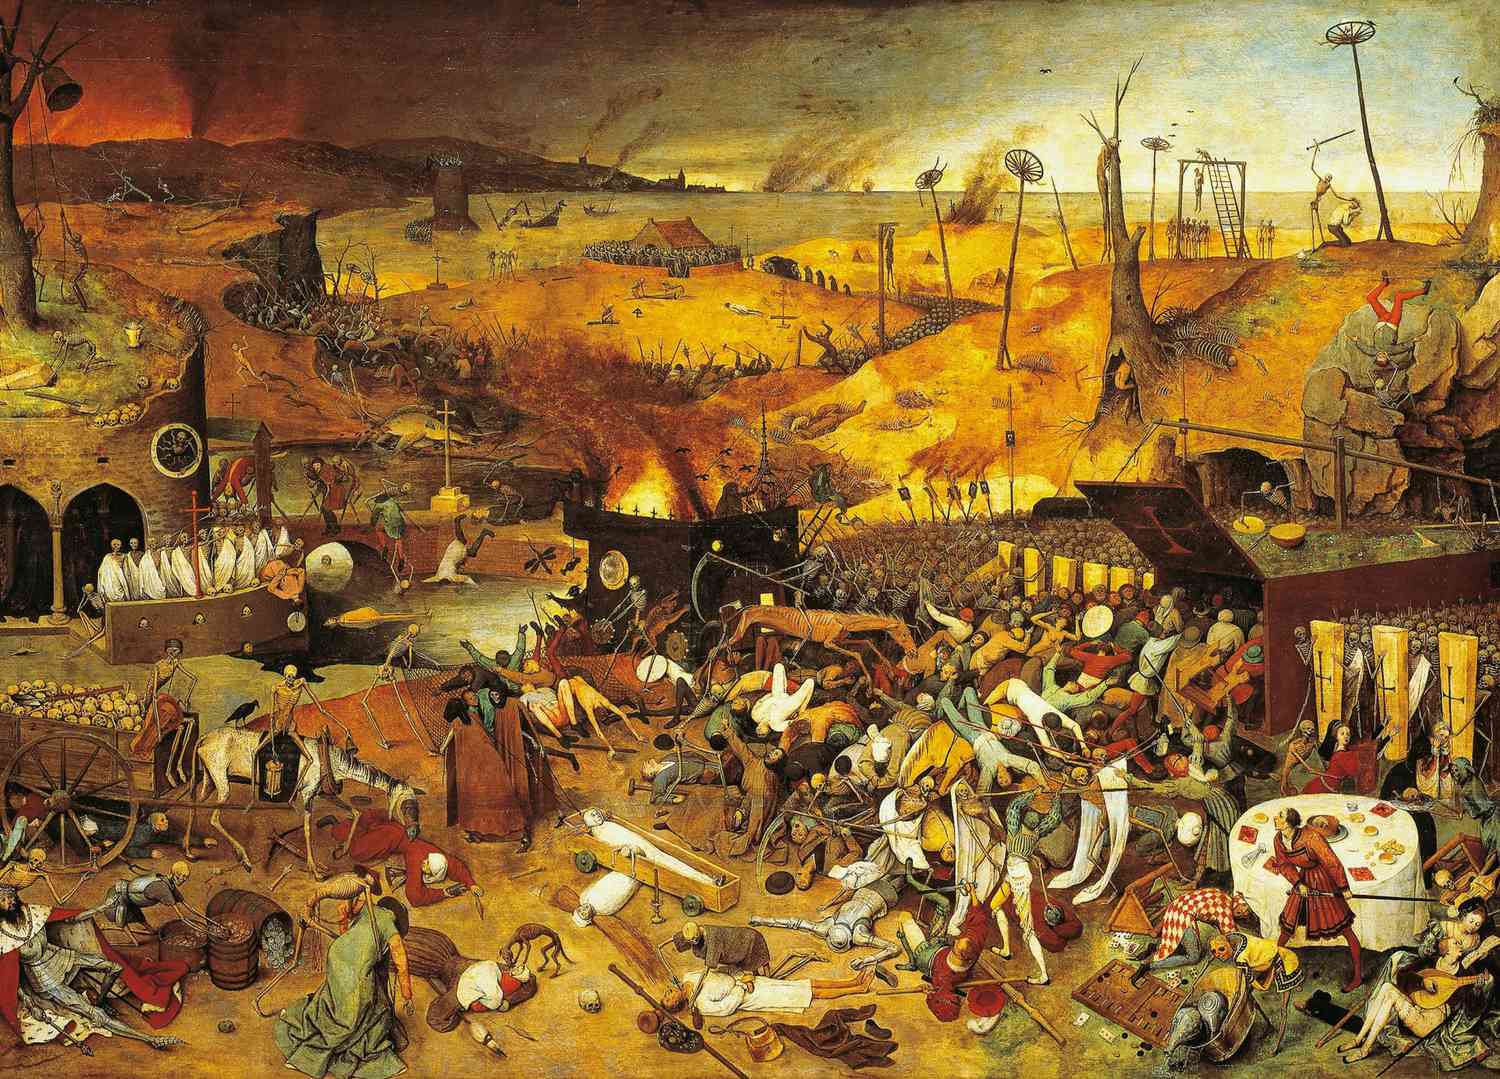 The Triumph of Death, 1562-1563, by Pieter Brueghel the Elder (1525-1569), oil on canvas, 117x162 cm. (Photo by DeAgostini/Getty Images)